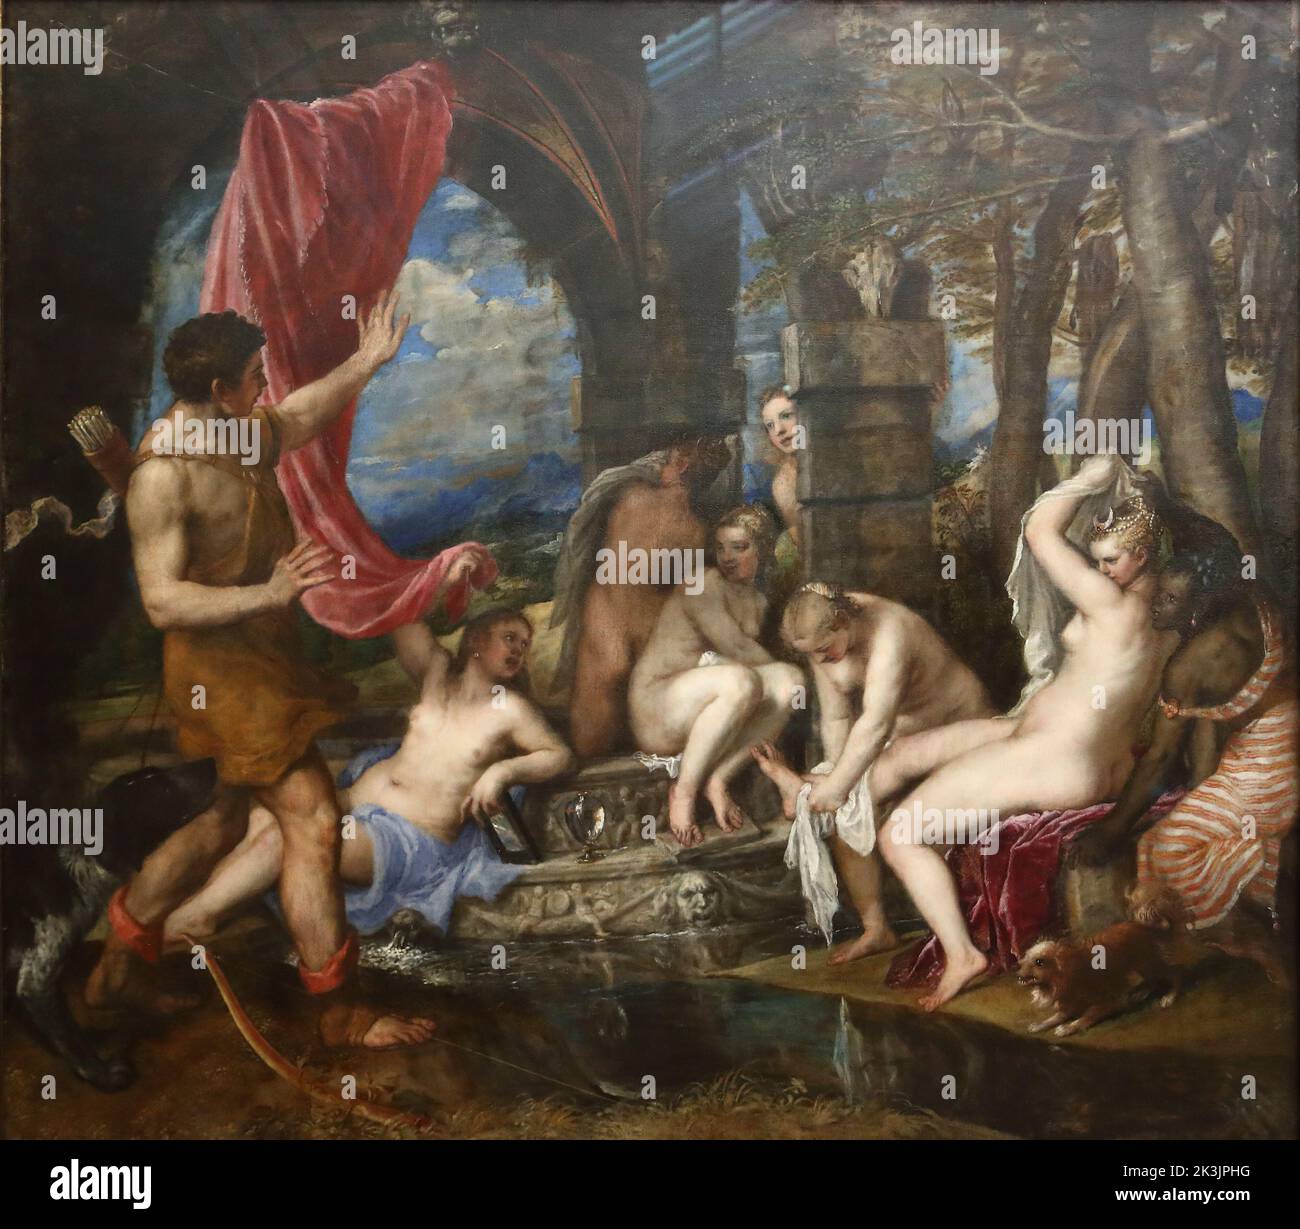 Diana and Actaeon by Italian Renaissance painter Titian at the National Gallery, London, UK Stock Photo